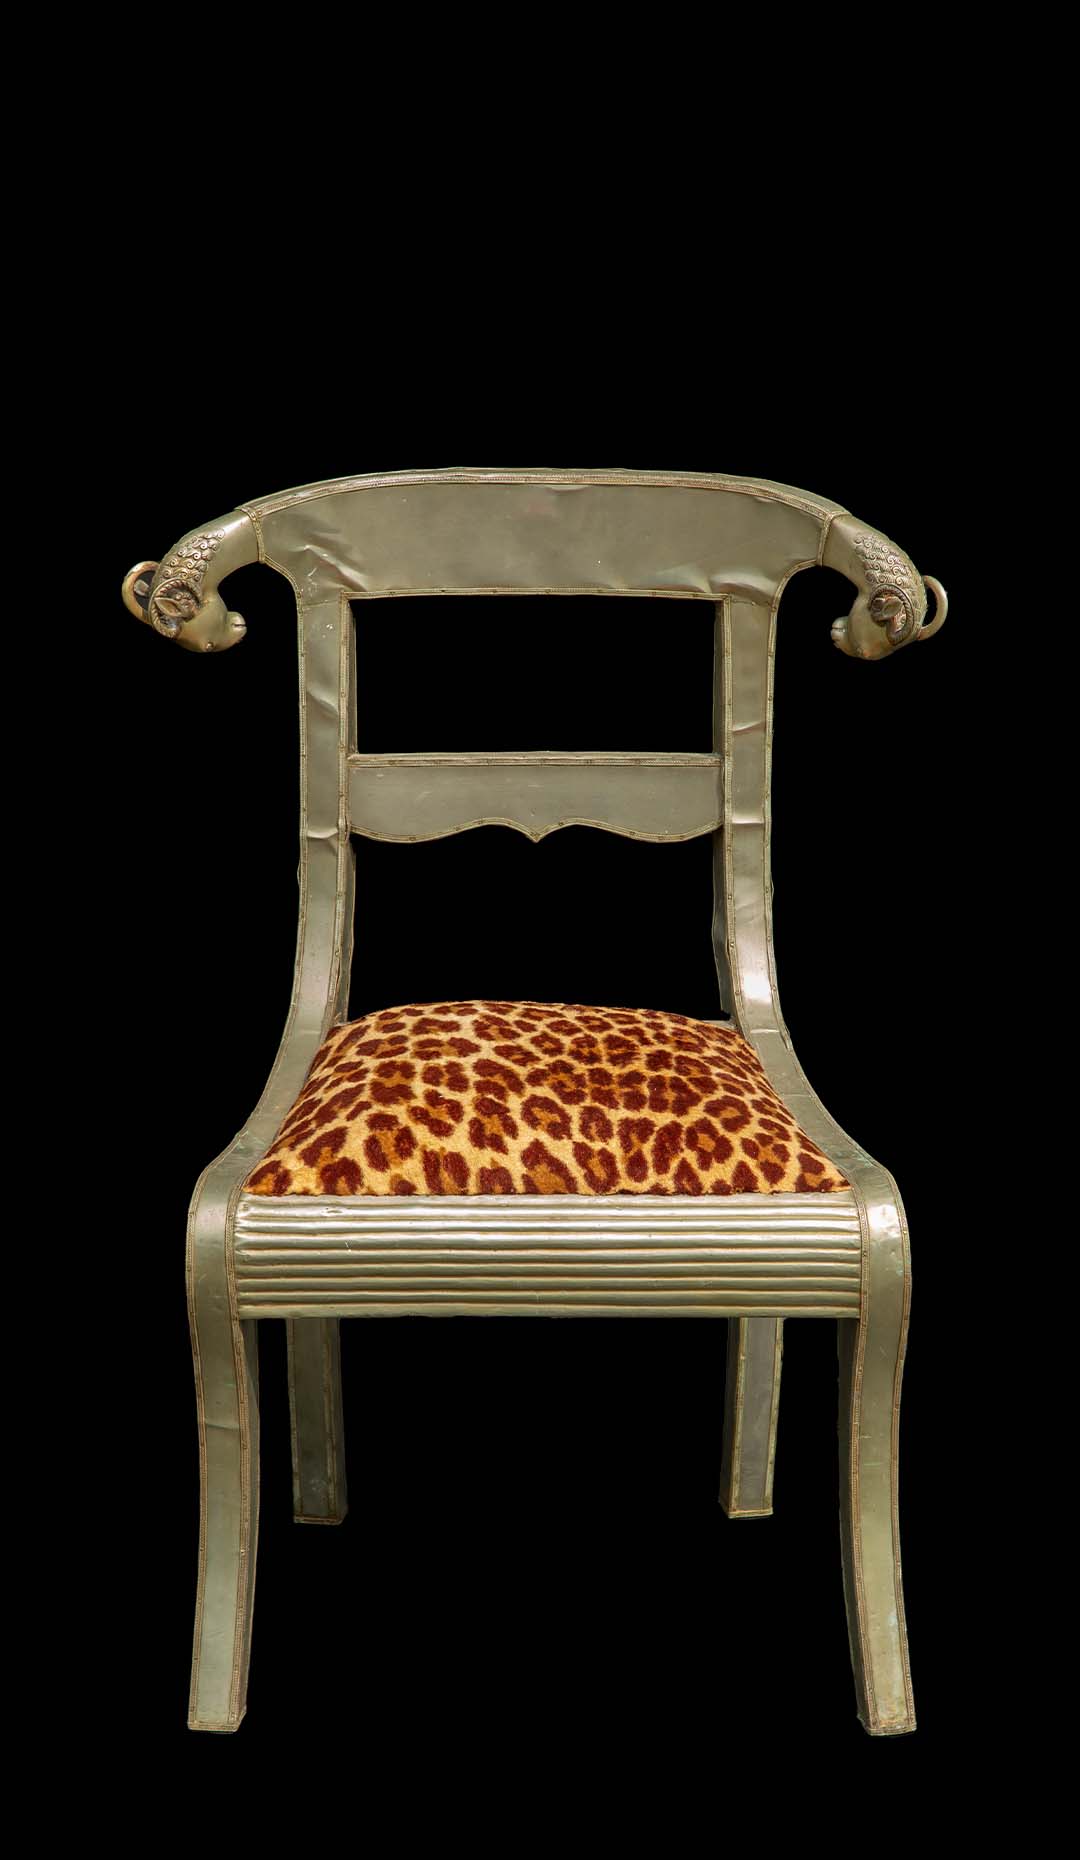 Anglo-Indian Dowry Chair: Regal Silvered Elegance with Ram’s Heads and Leopard Seat